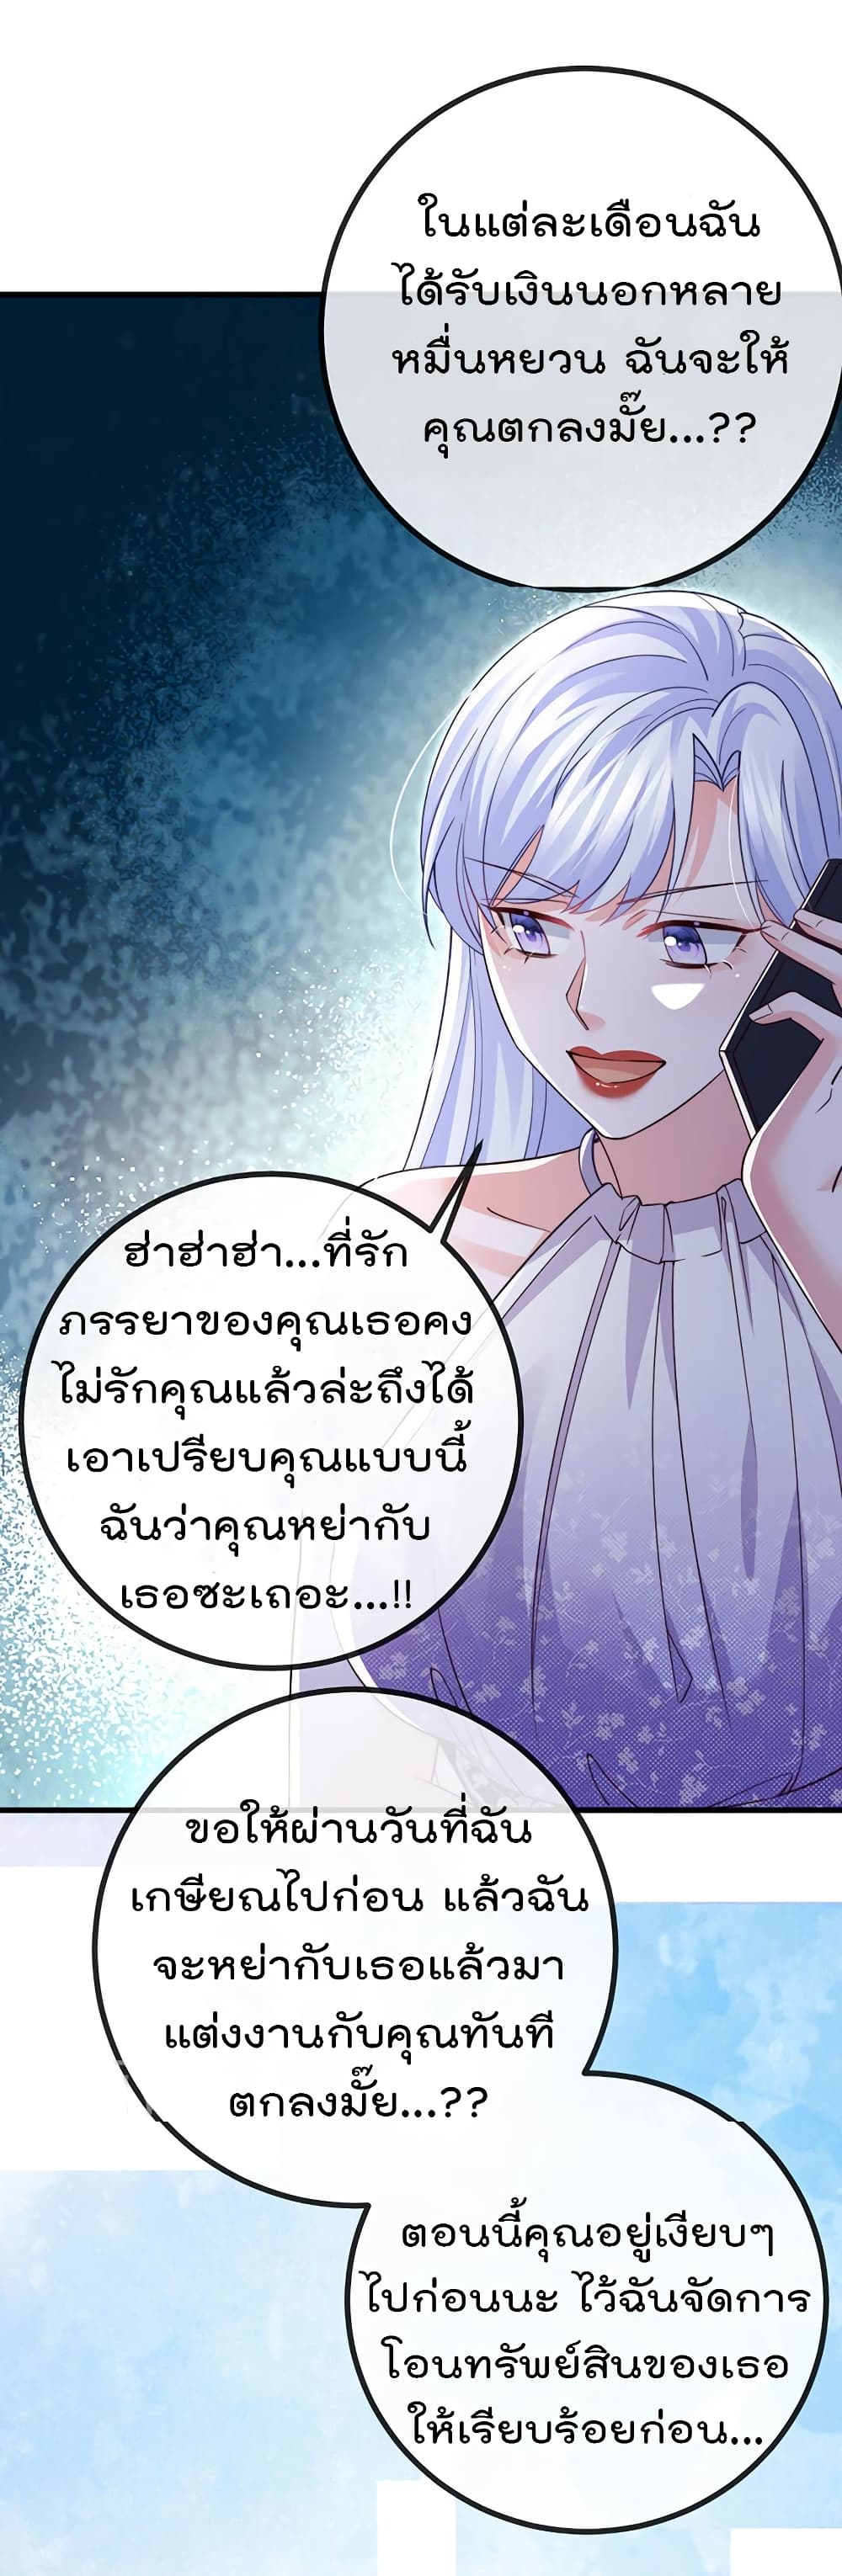 One Hundred Ways to Abuse Scum ตอนที่ 81 (21)